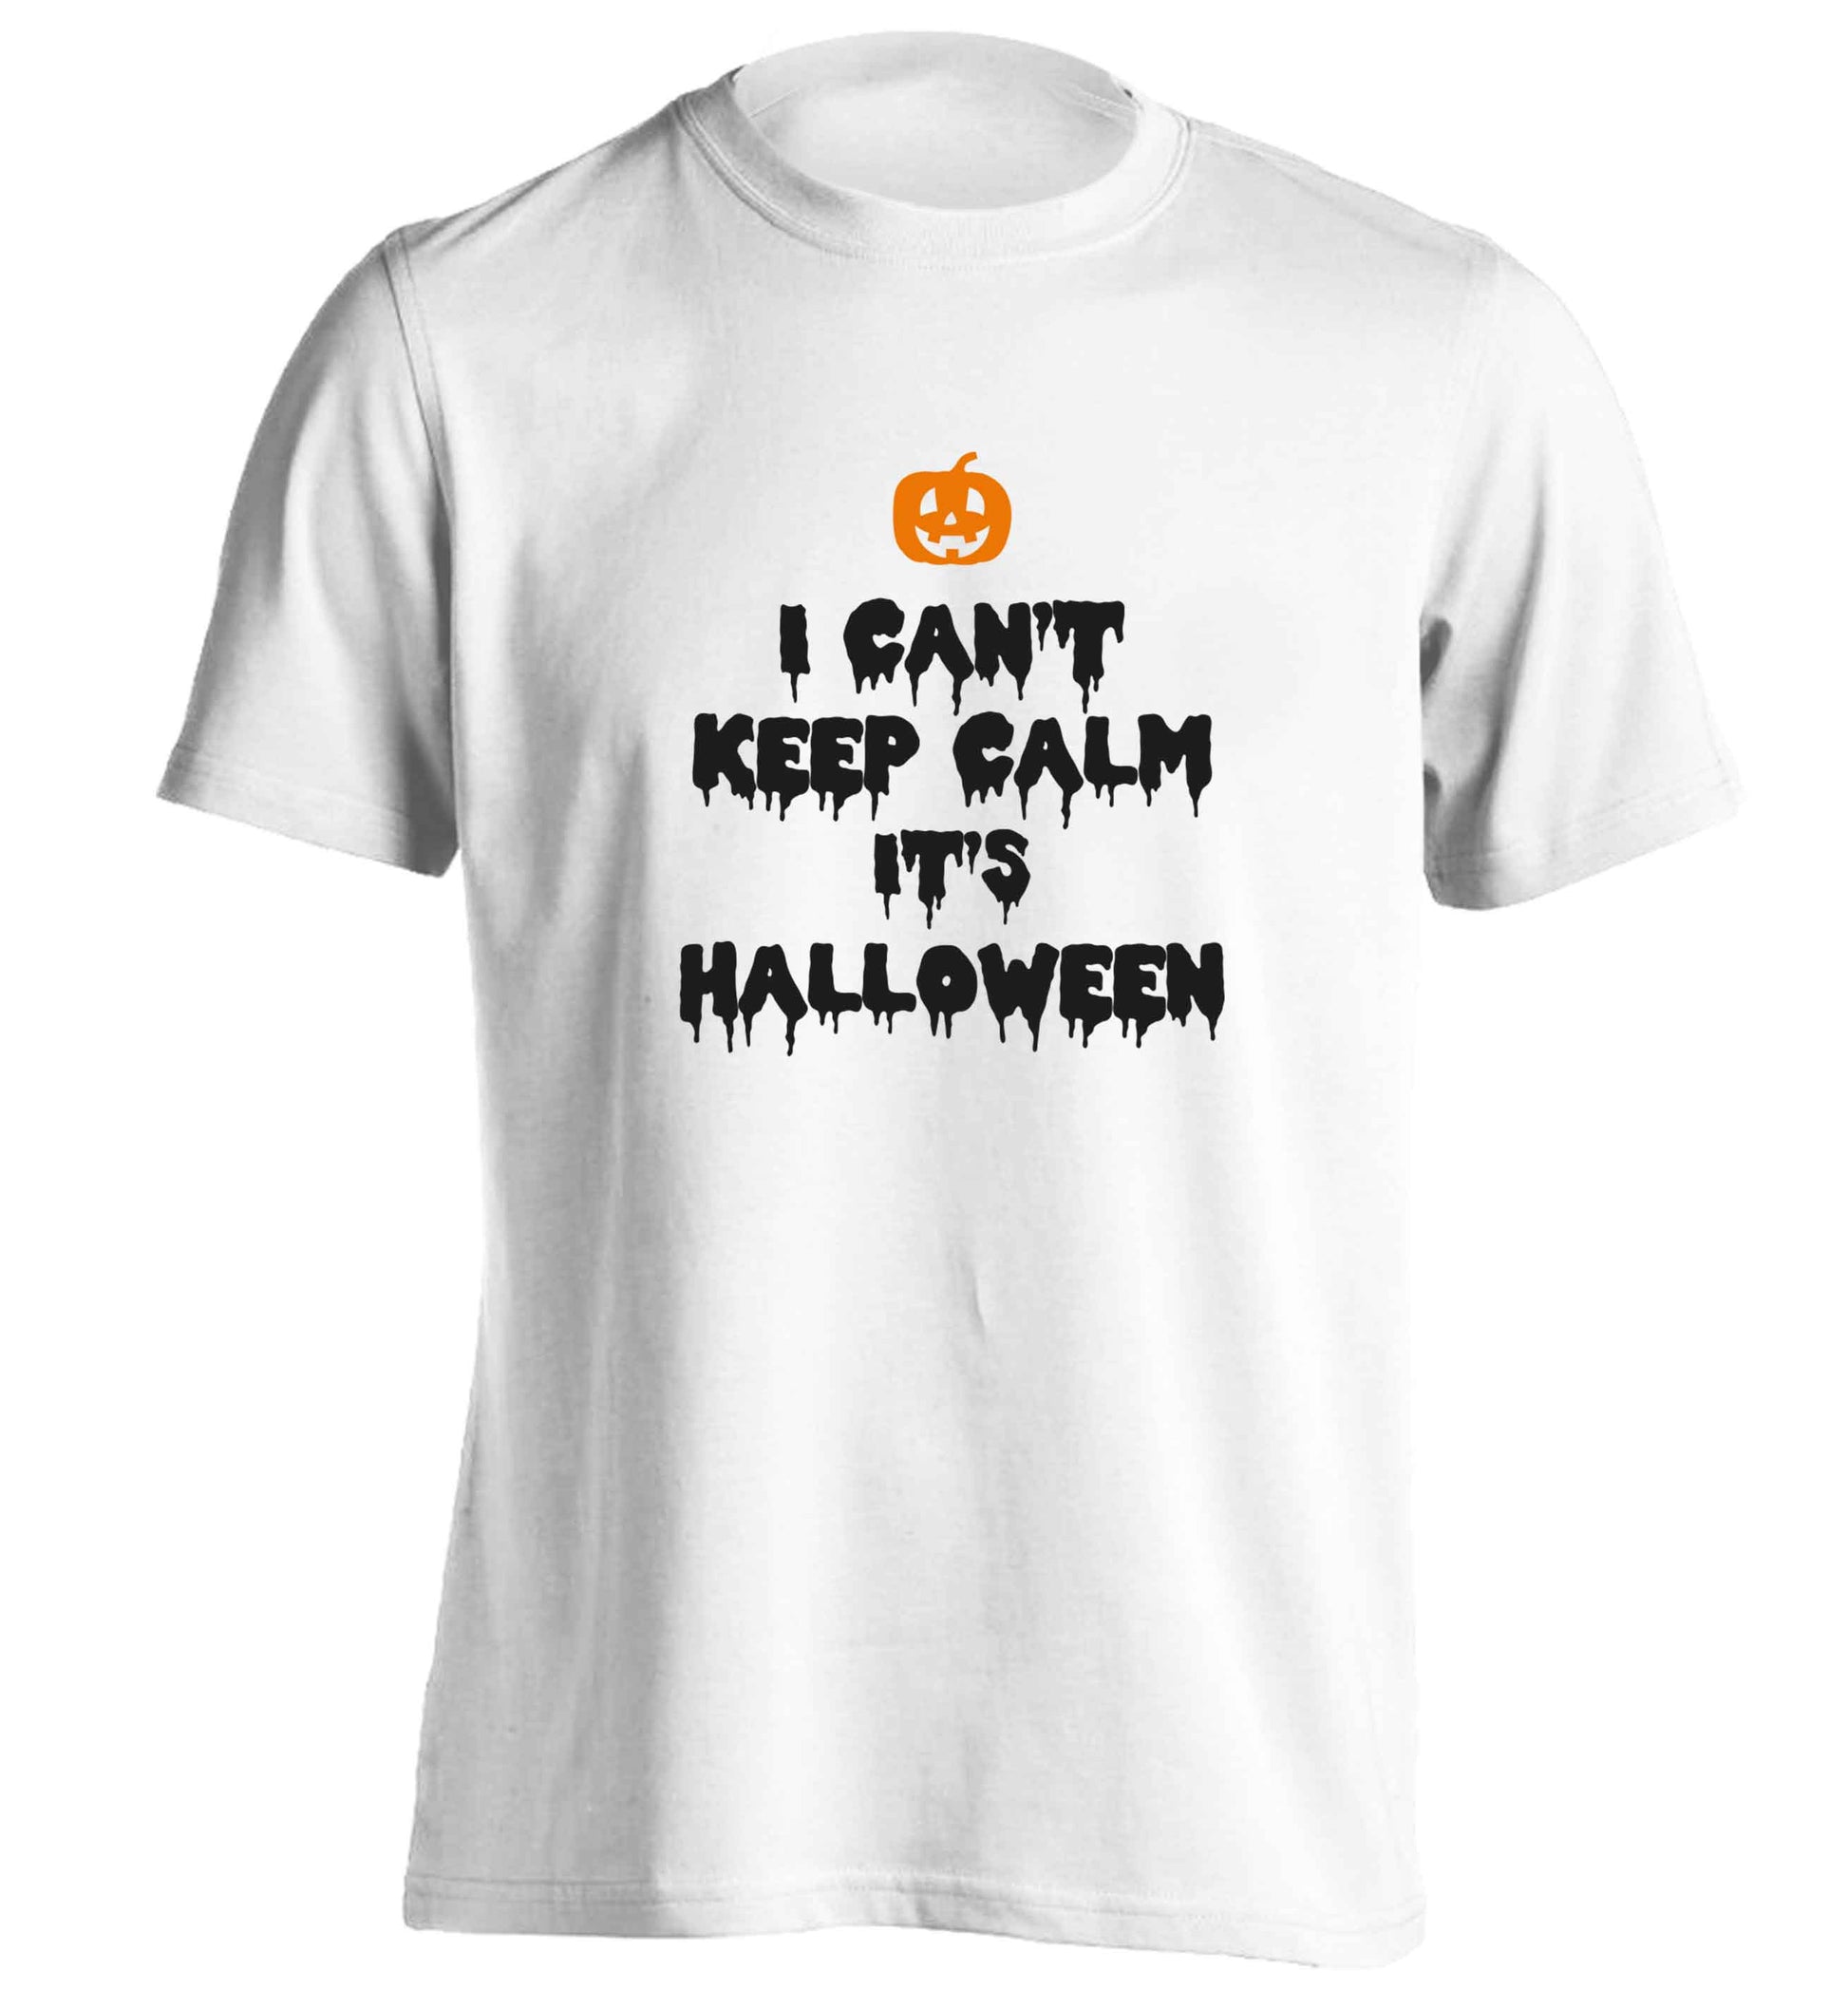 I can't keep calm it's halloween adults unisex white Tshirt 2XL